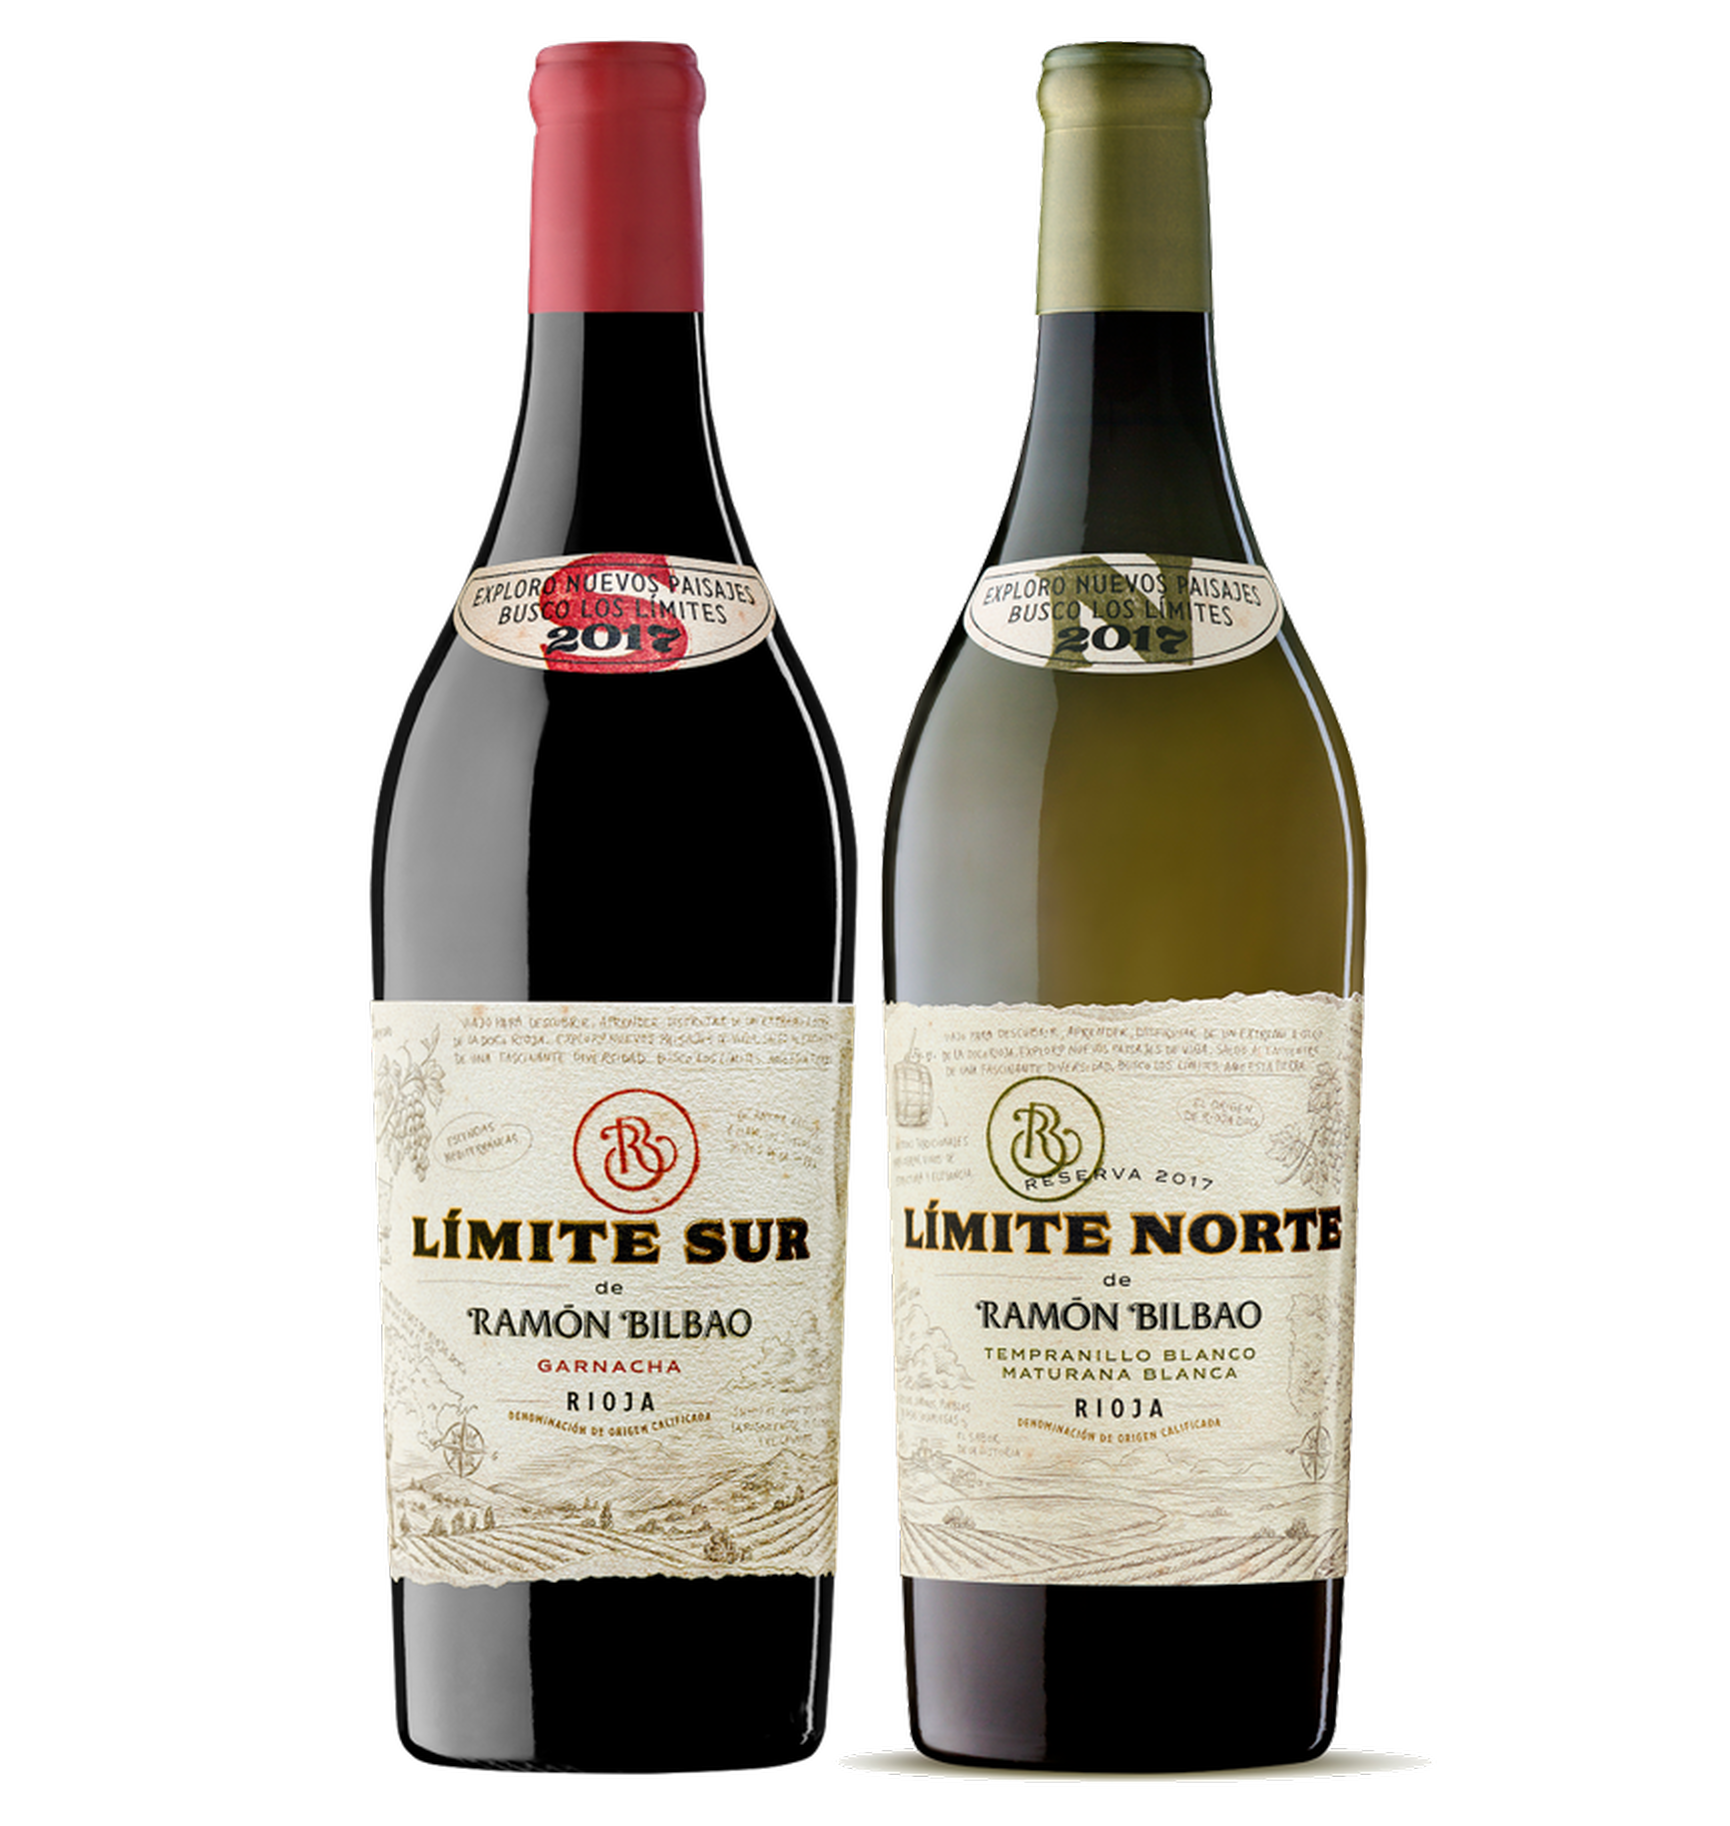 Bottles of Limite Norte and Sur: Ramon Bilbao launches Limite Norte and Limite Sur, showcasing Rioja's extremes